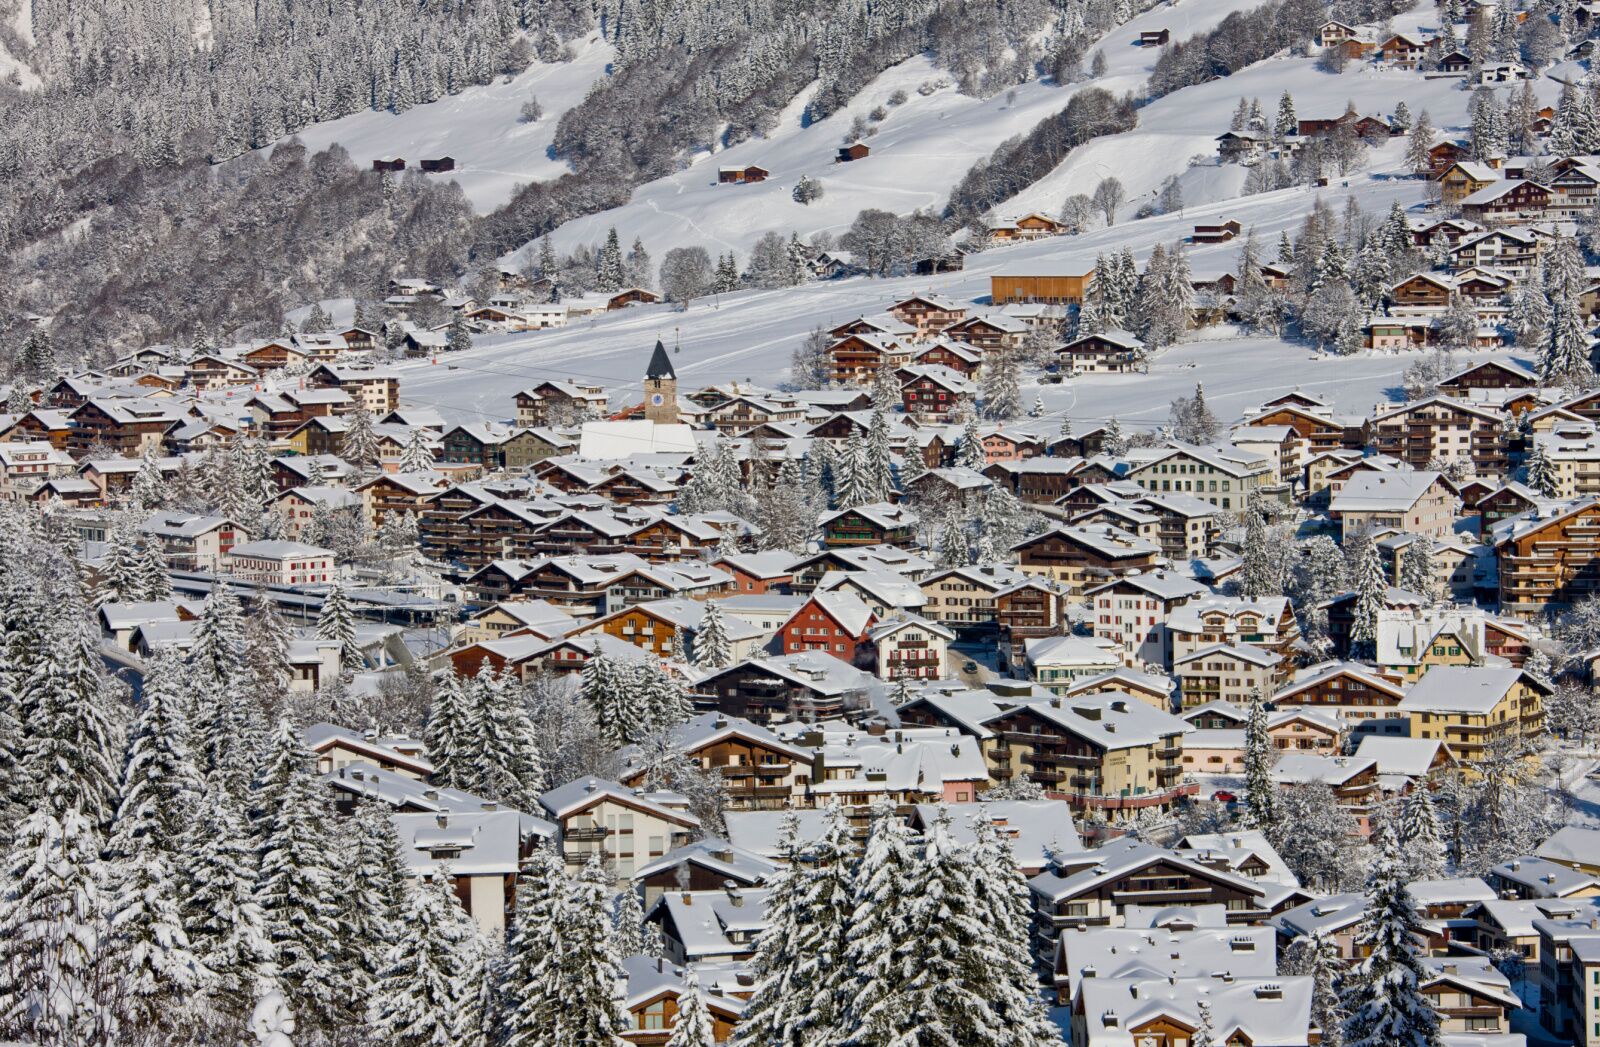 Davos Klosters, one of th ebest Alps ski resorts for being near transportation